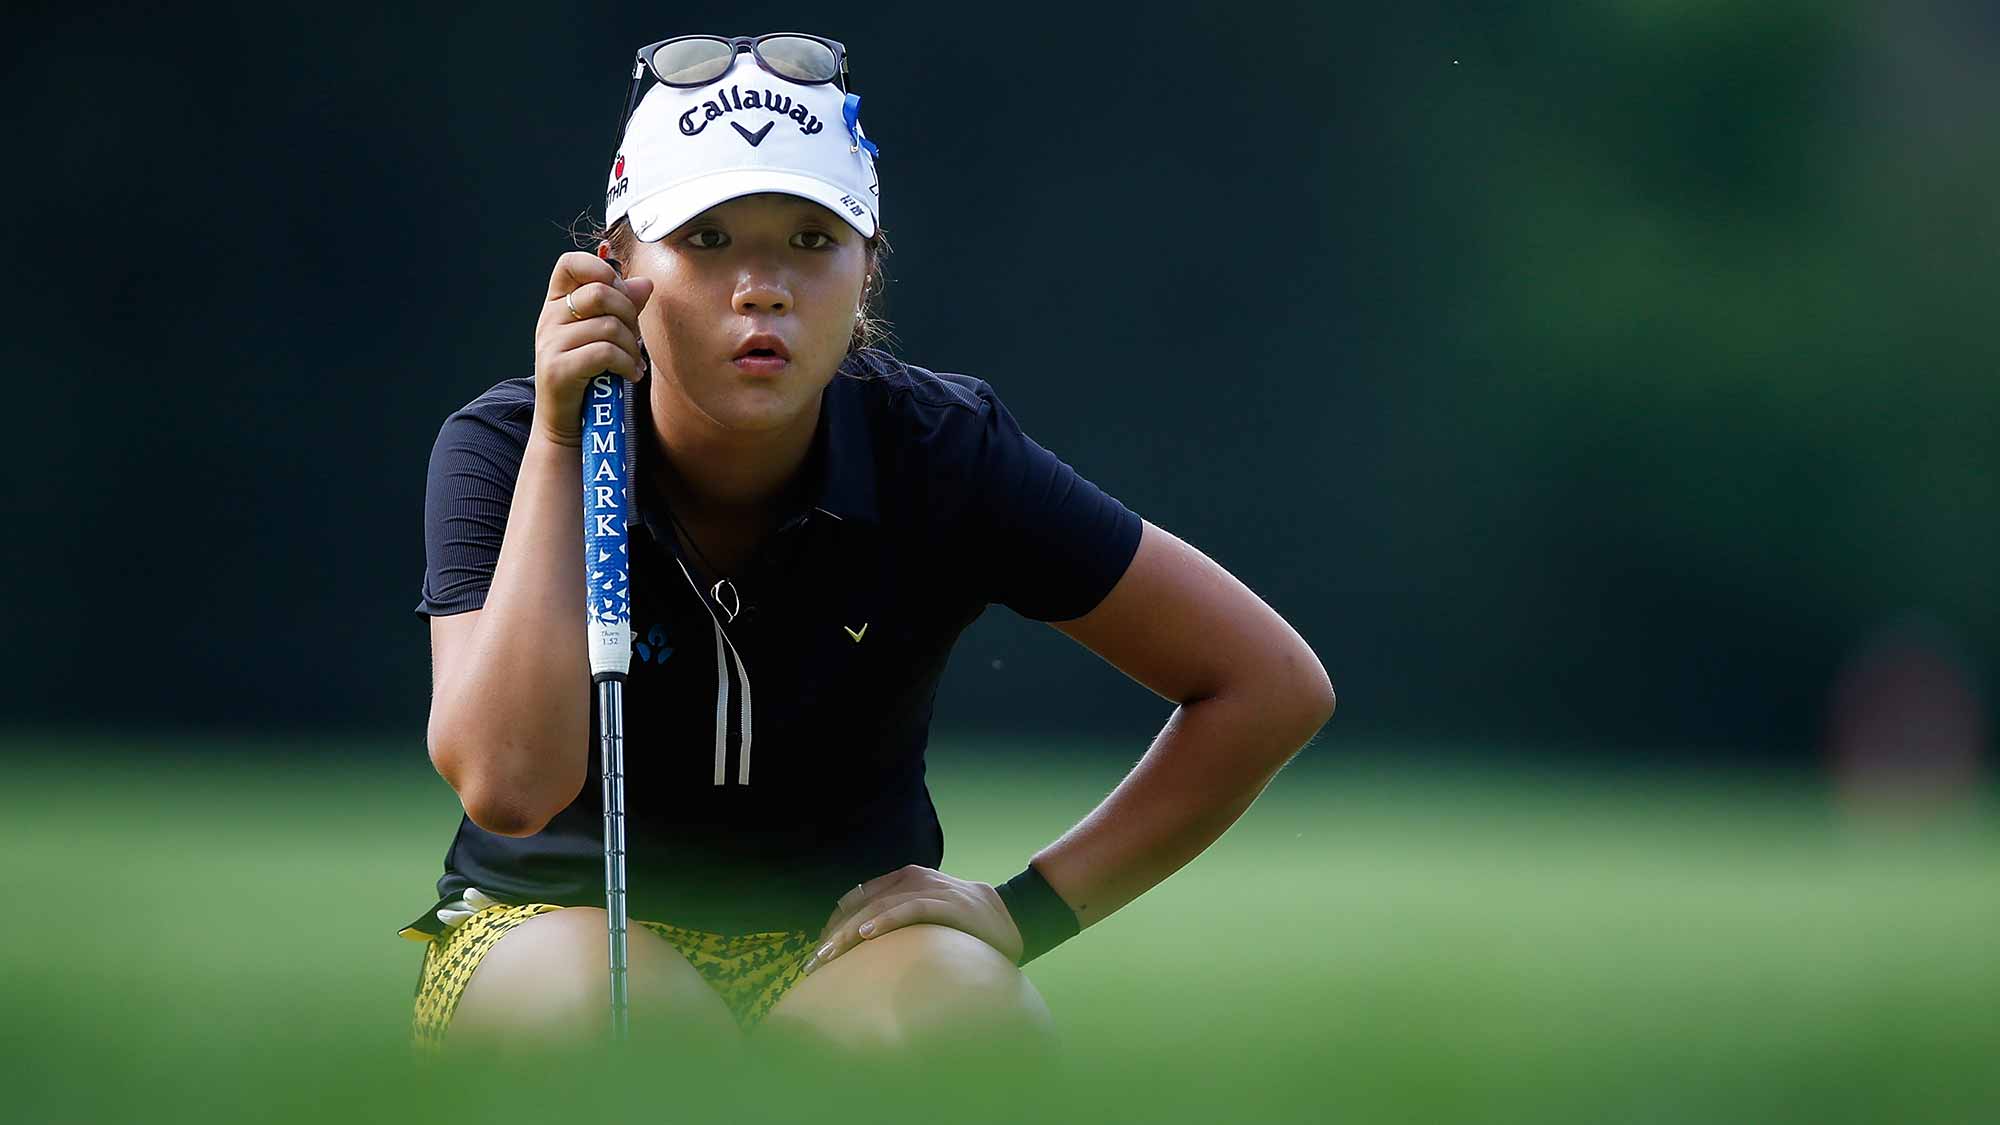 Lydia Ko of New Zealand reads a putt on the 17th green during the third round of the Marathon Classic presented by Owens Corning and O-I at Highland Meadows Golf Club